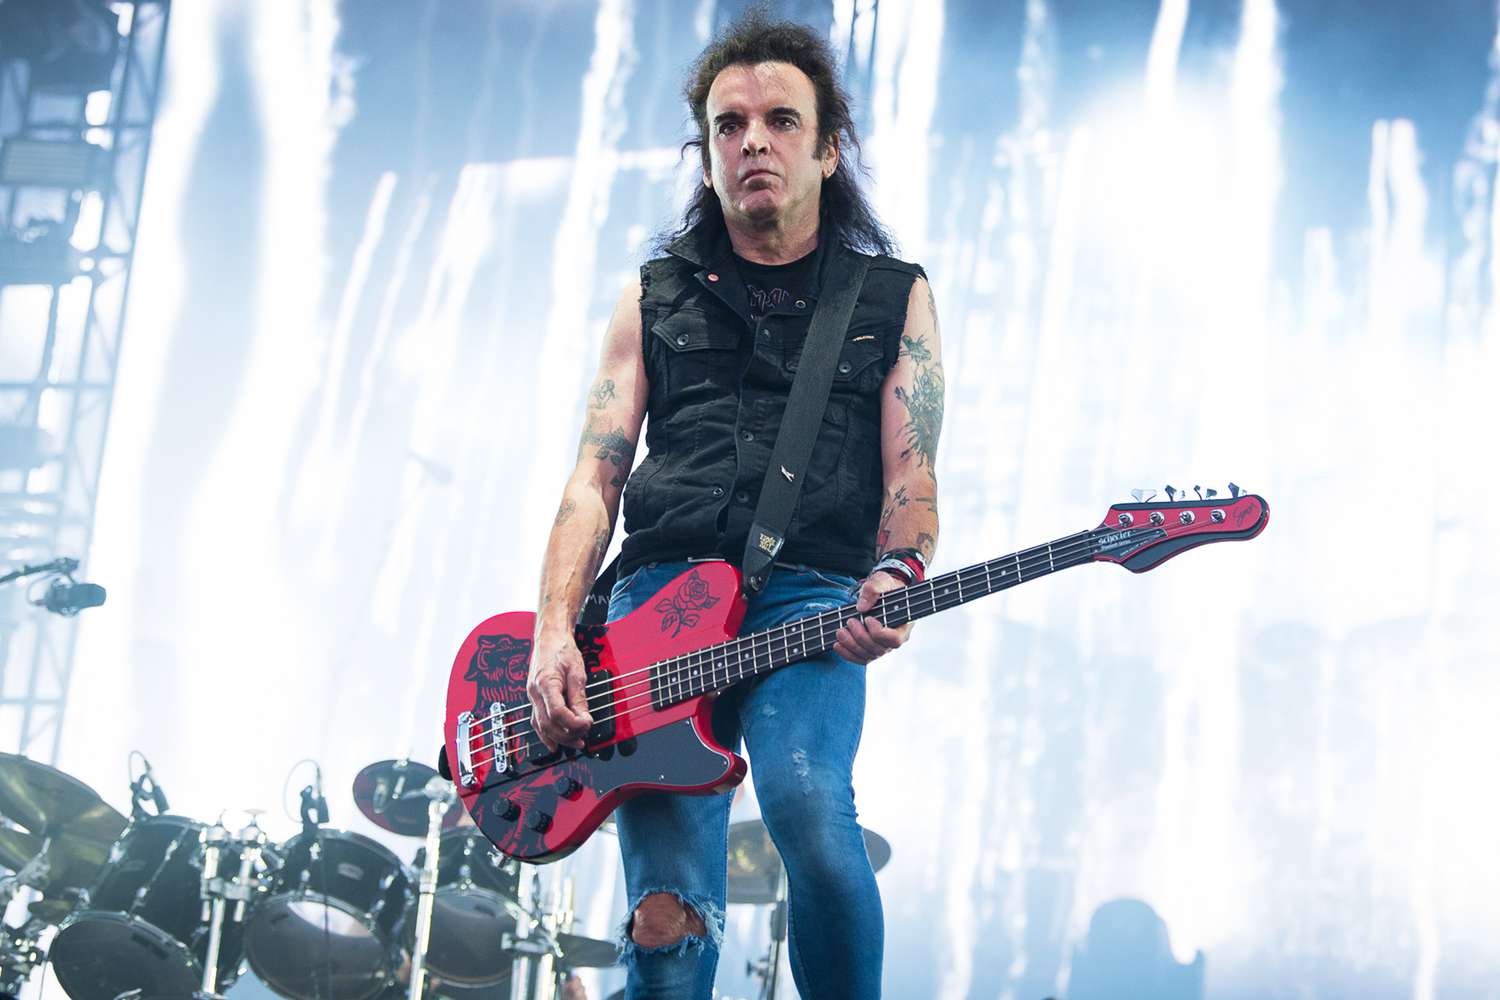 Simon Gallup from The Cure performs at Rock en Seine on August 23, 2019 in Saint-Cloud, France.